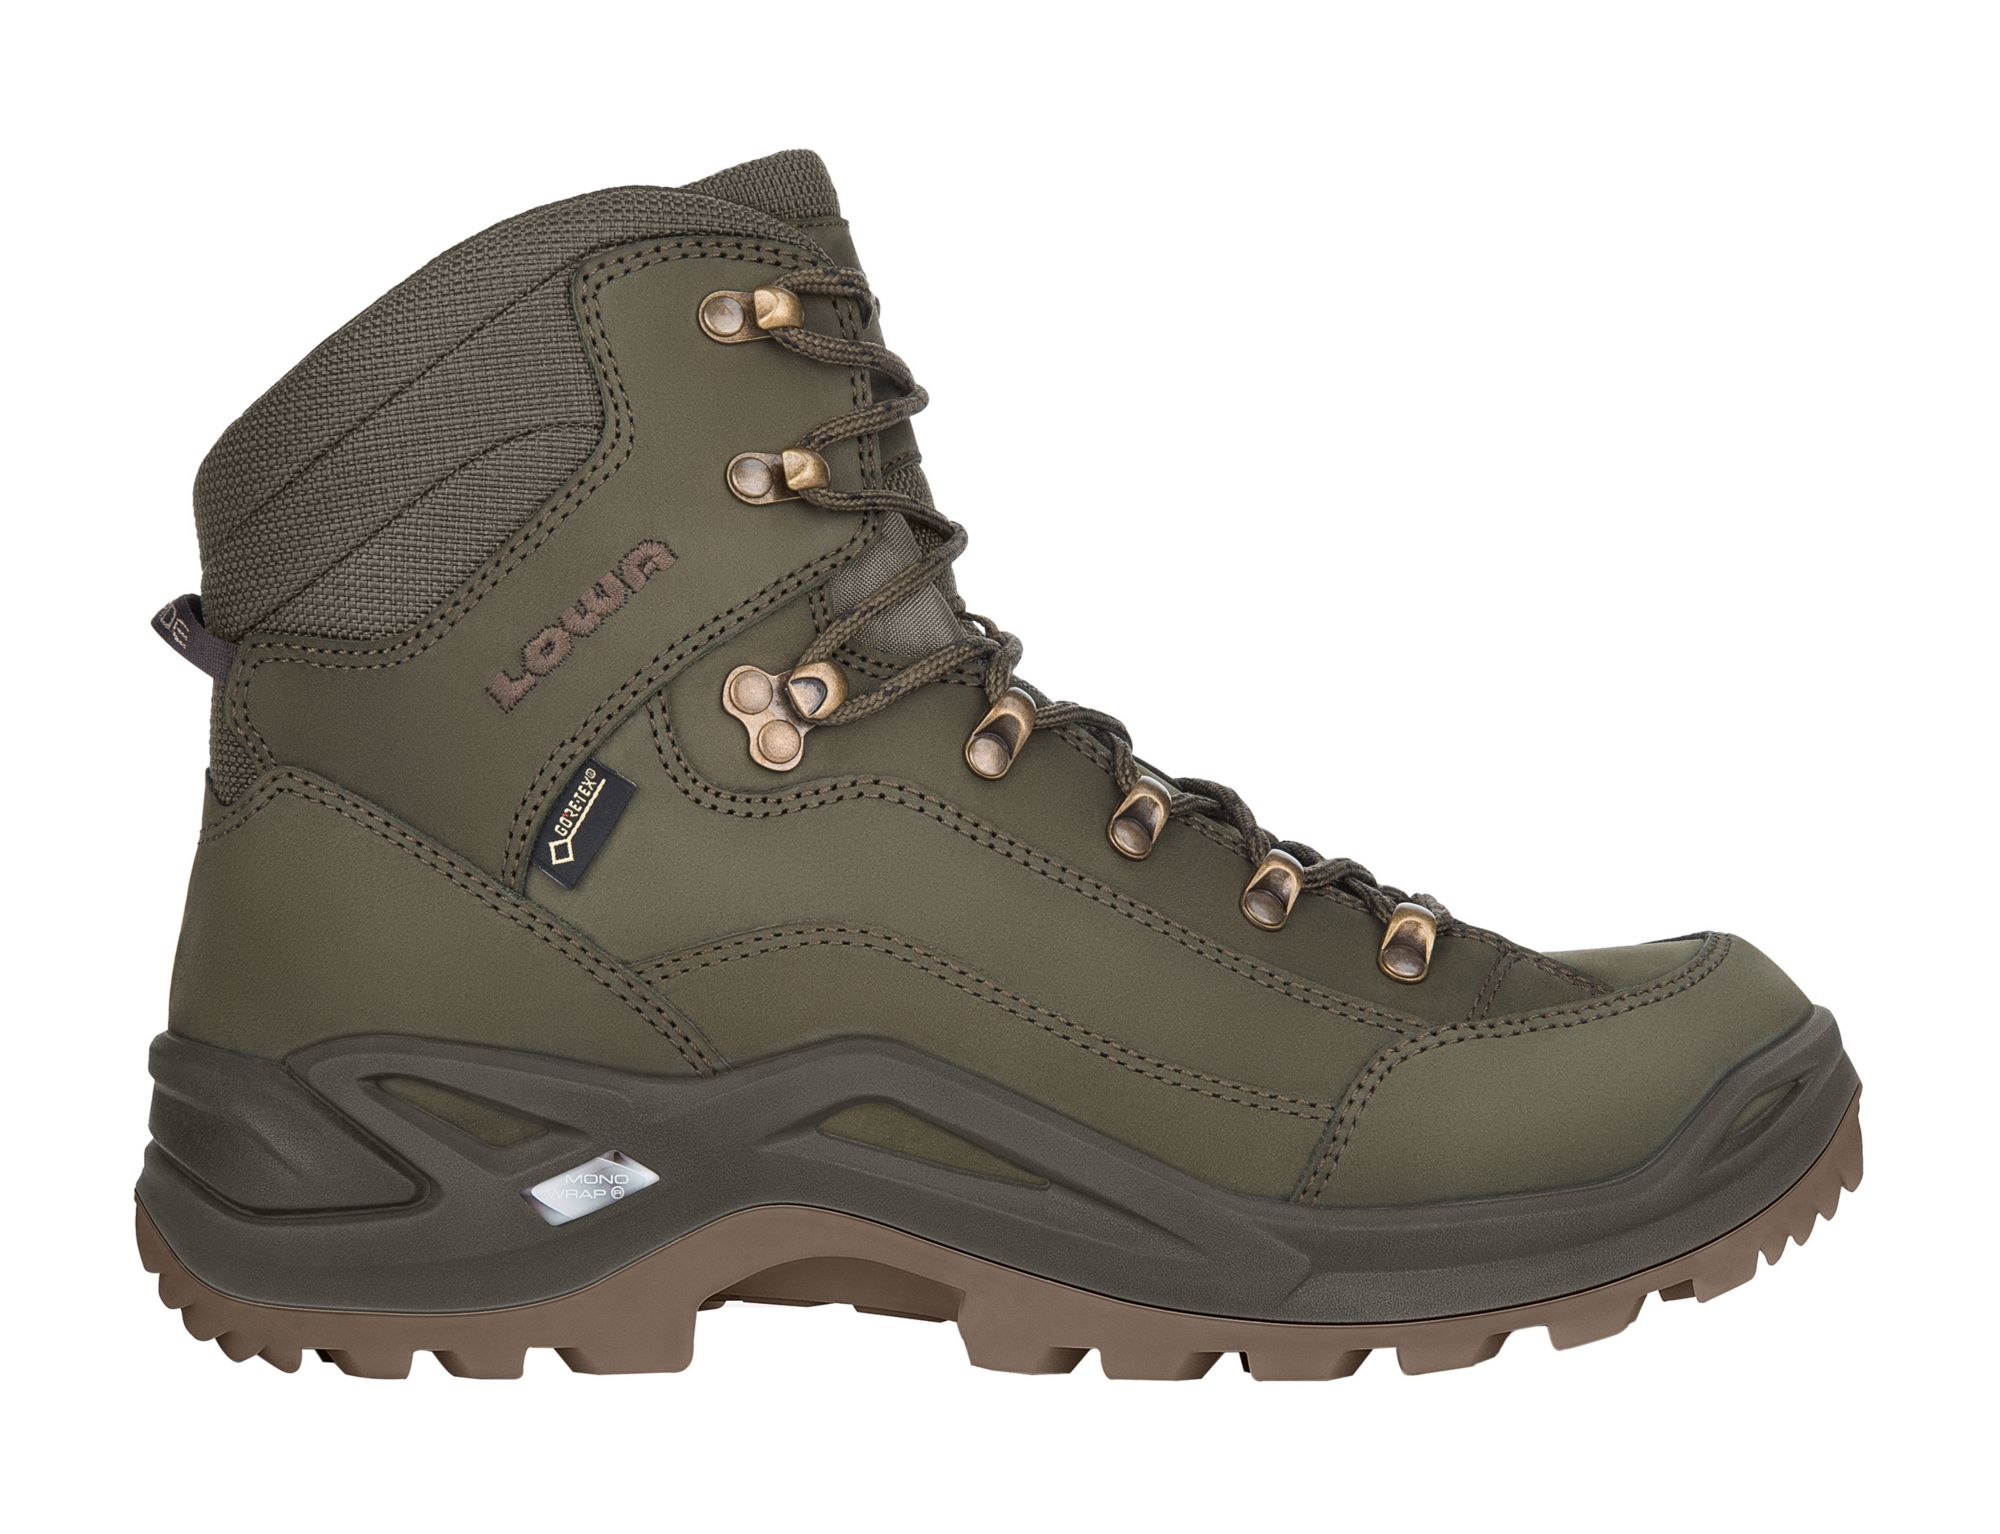 Photos - Trekking Shoes LOWA Men's Renegade GTX Mid Boots, Size 9.5, Basil | Father's Day Gift Ide 